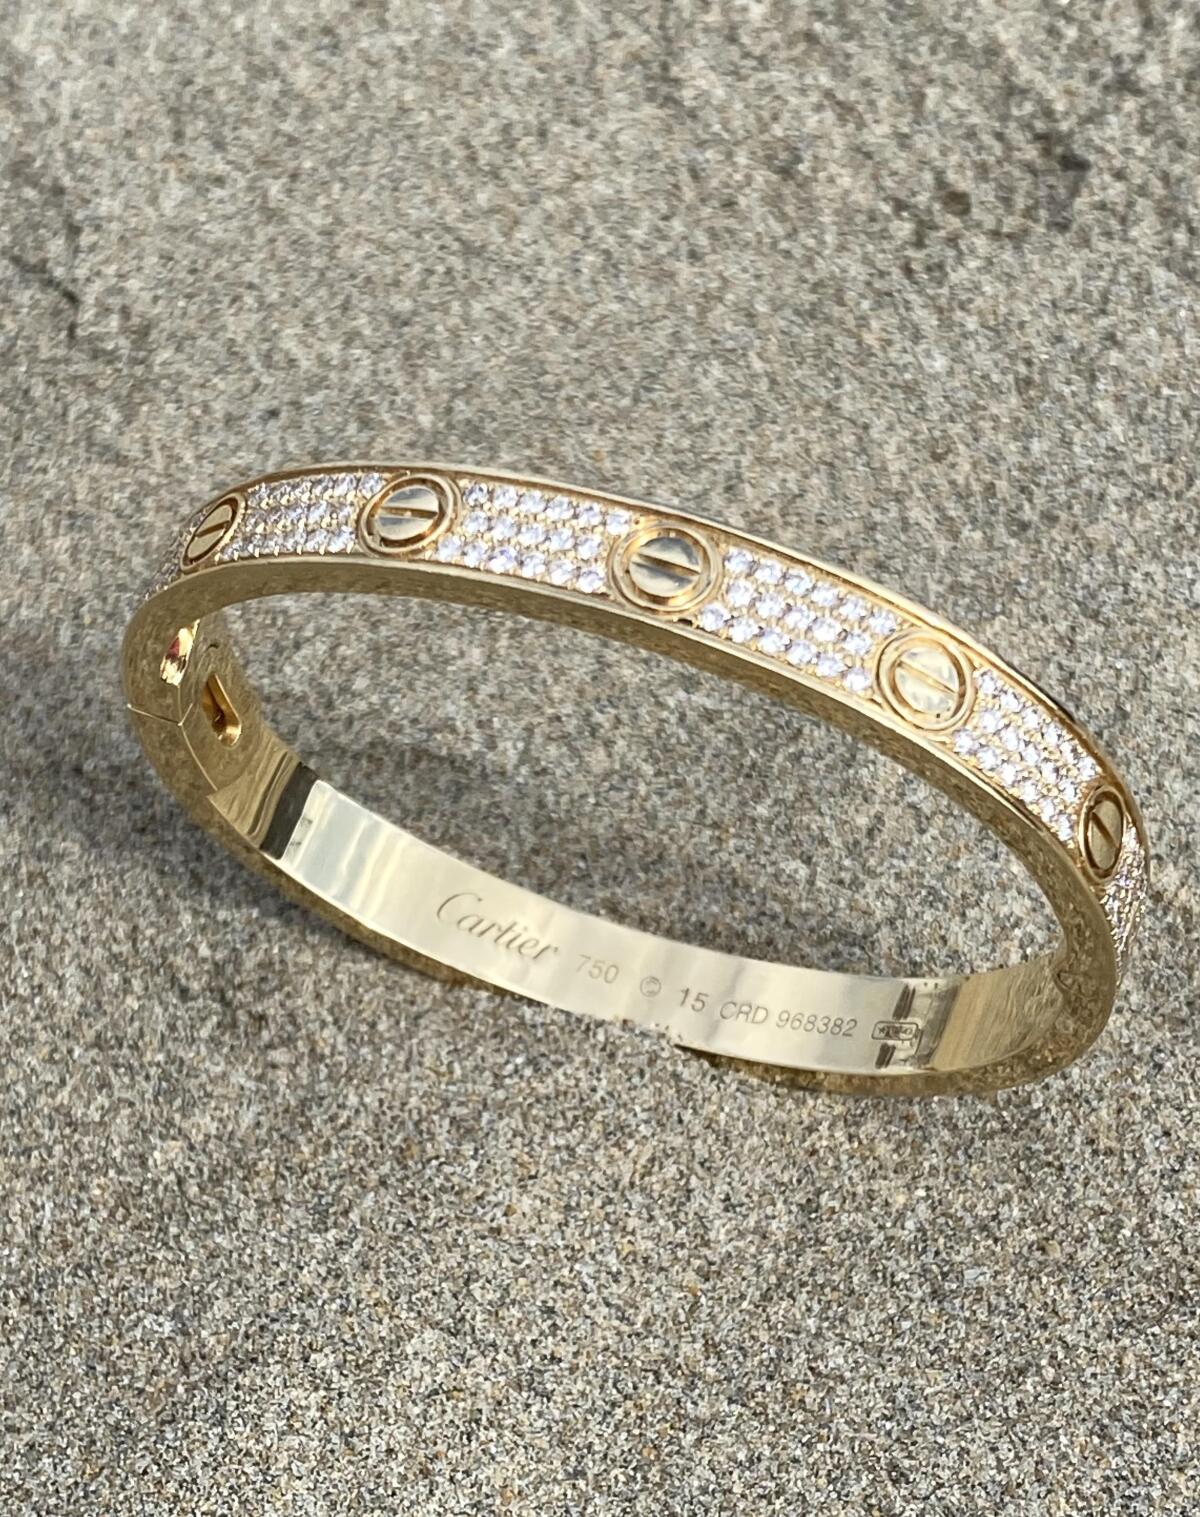  Stan Ross helped find a Cartier bracelet at Newport Beach Pier after its owner had walked a long stretch of shoreline.